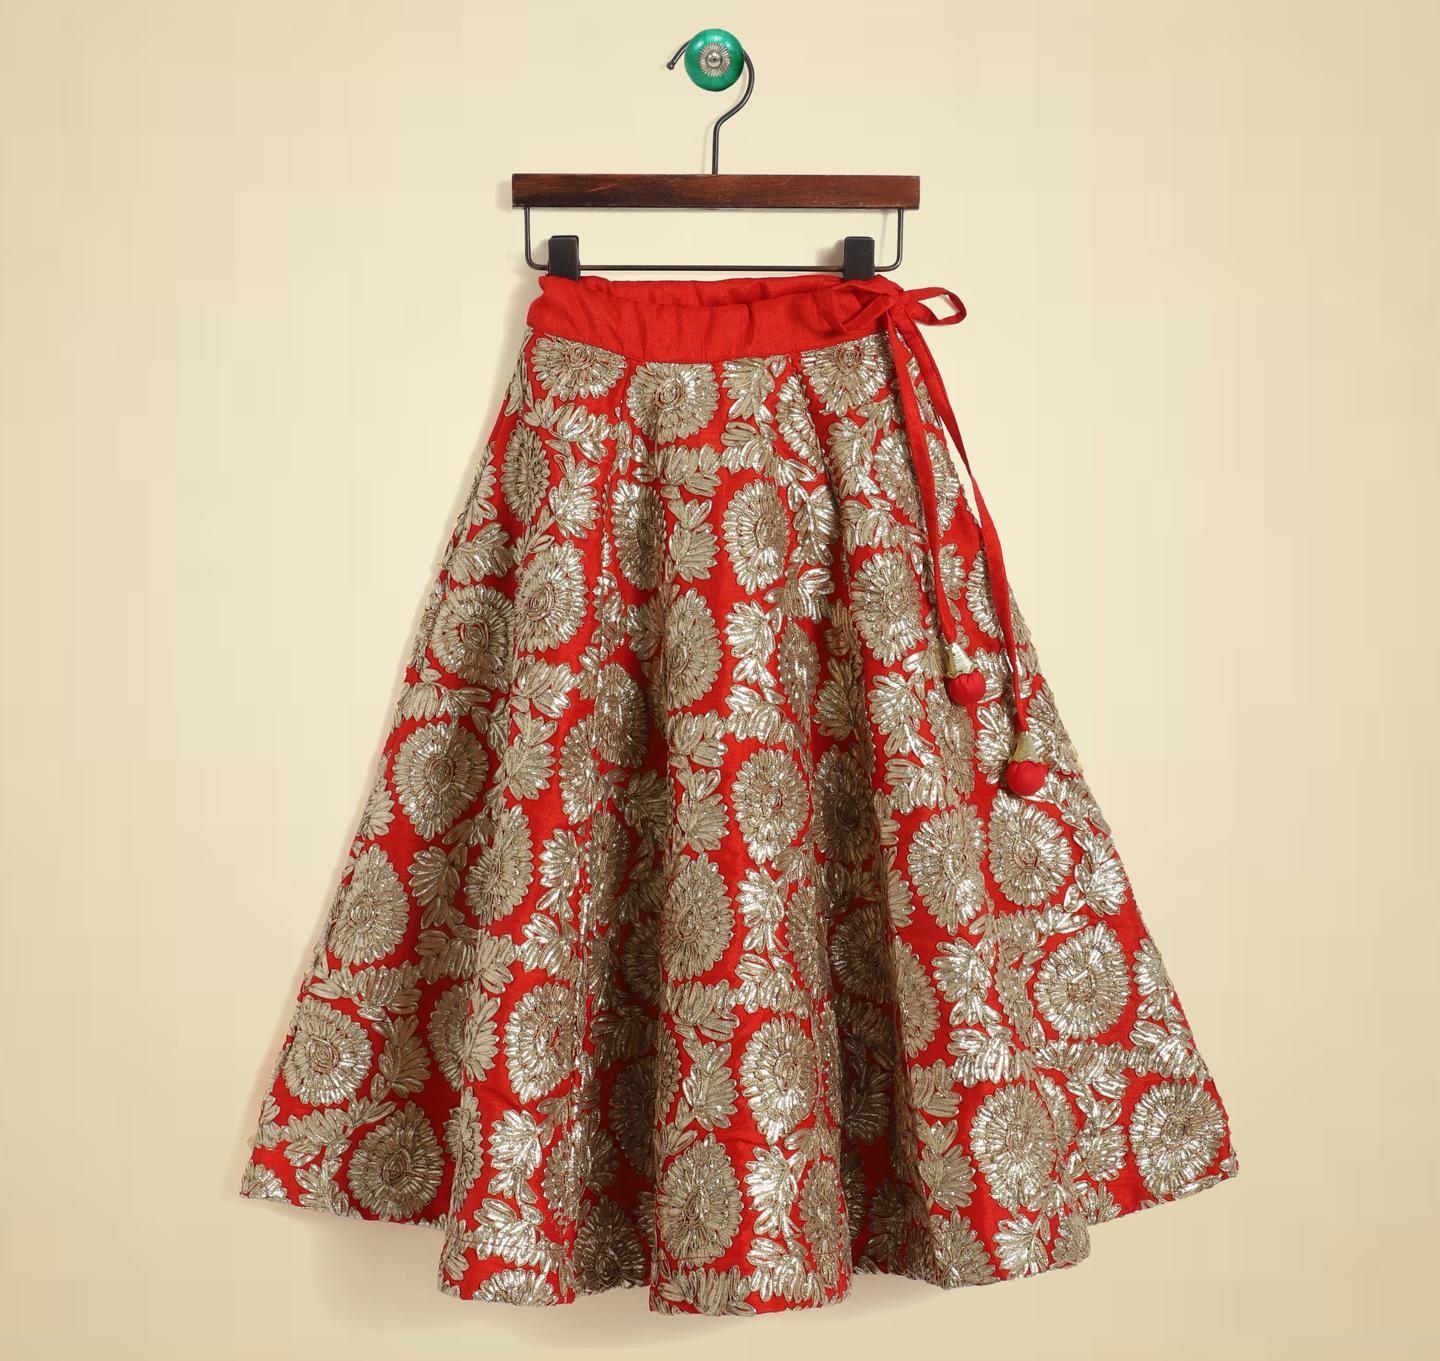 red-wing-sleeves-applique-floral-printed-blouses-and-lehenga-set-10509010RD, Kids Clothing, Organza,Cotton Girl Lehenga Set